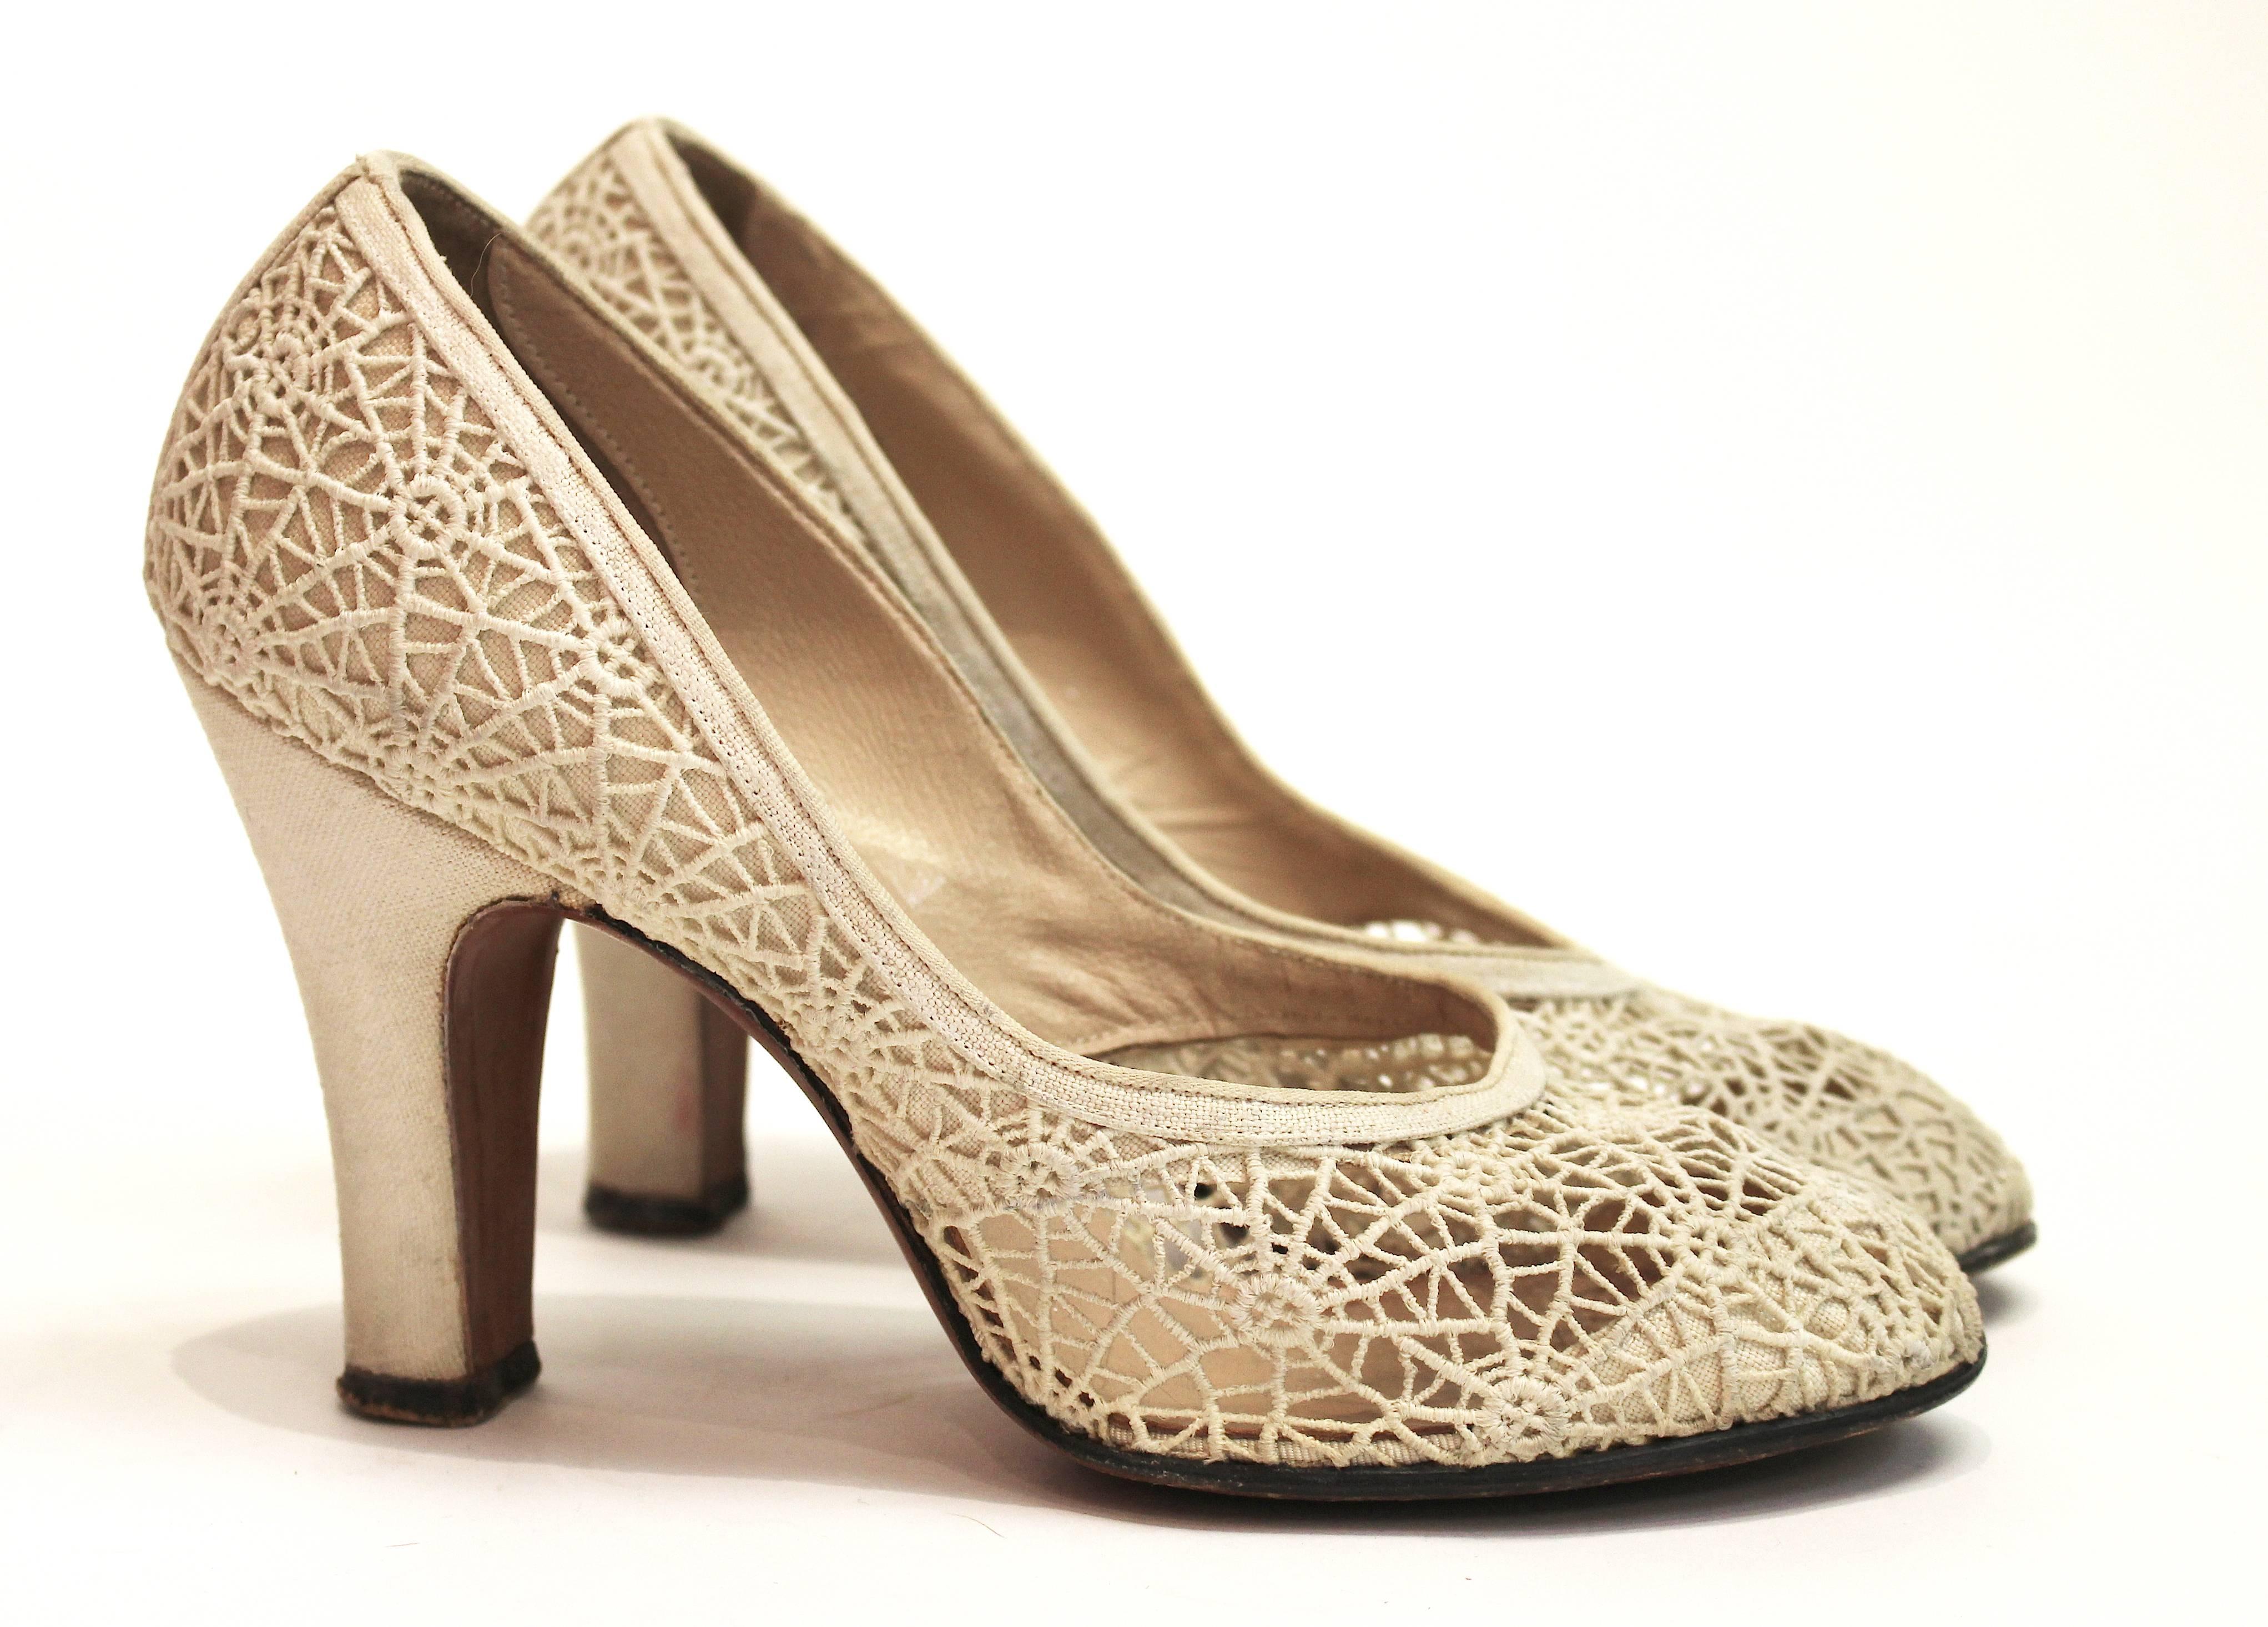 1950s cream spider web lace heels. Canvas upper, leather soles. 

Measurements:
Insole: 9 1/4"
Palm of the foot: 3"
Heel height: 3"
 